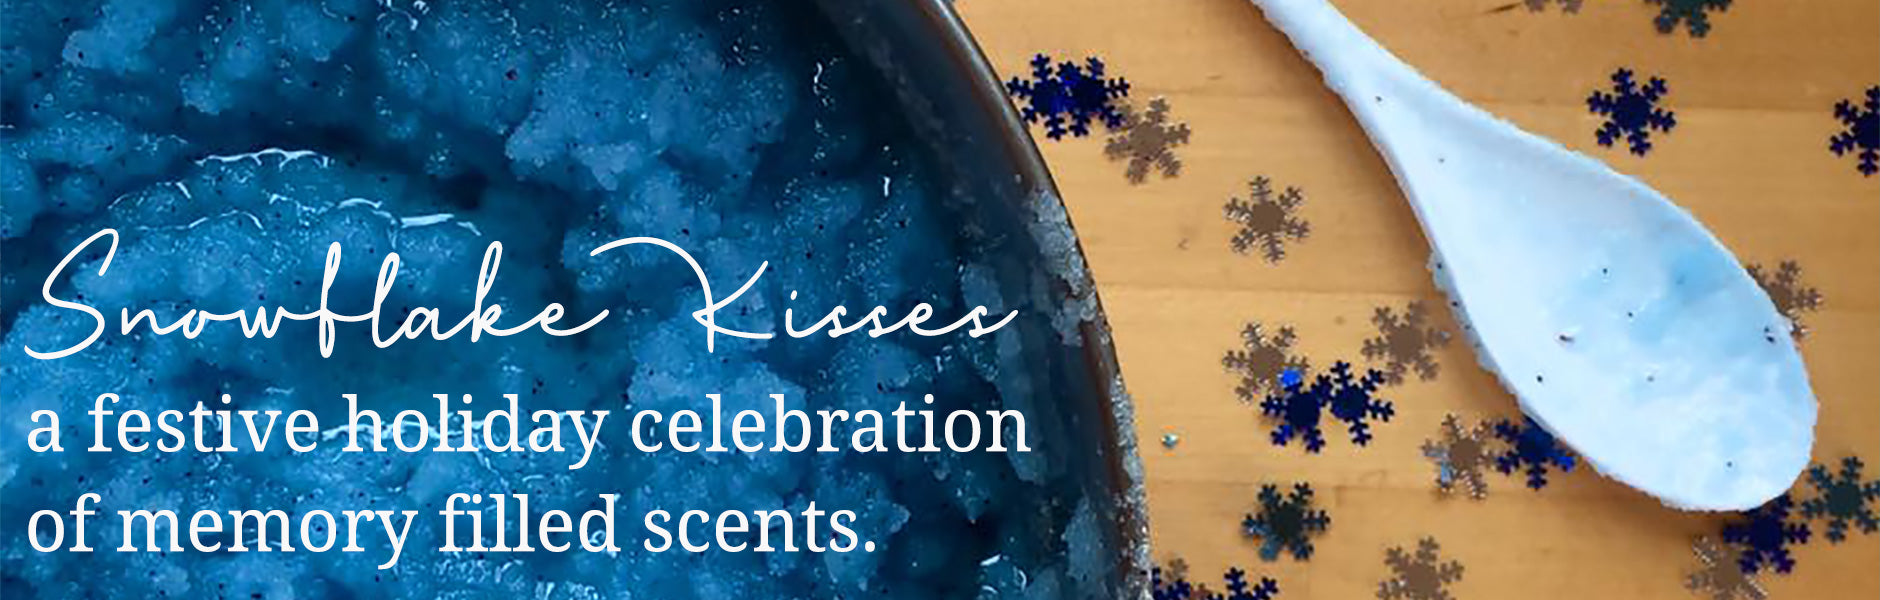 Snowflake Kisses - a festive holiday celebration of memory filled scents